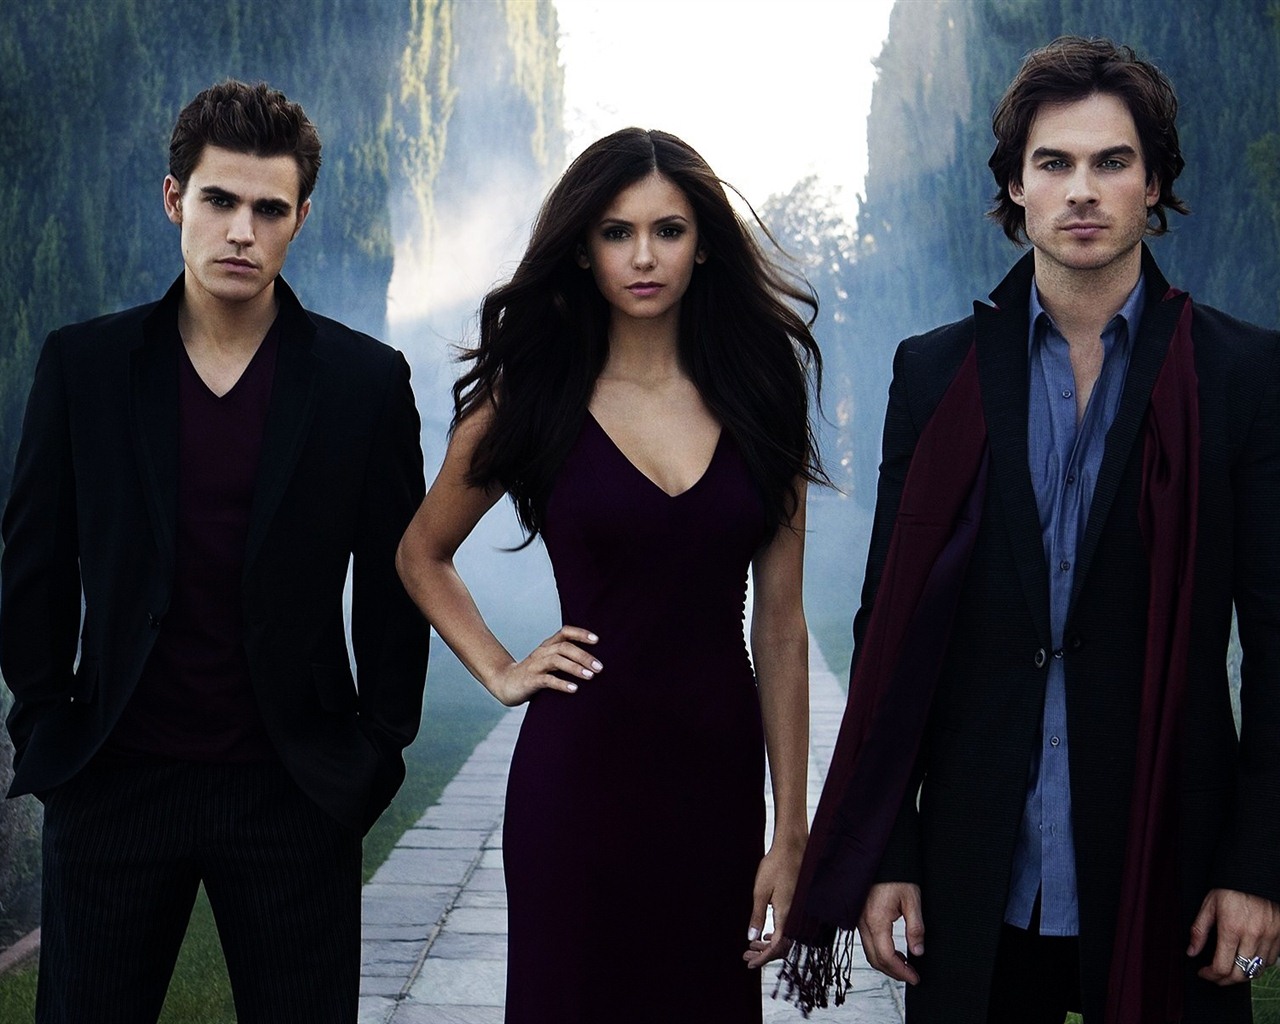 The Vampire Diaries HD Wallpapers #6 - 1280x1024